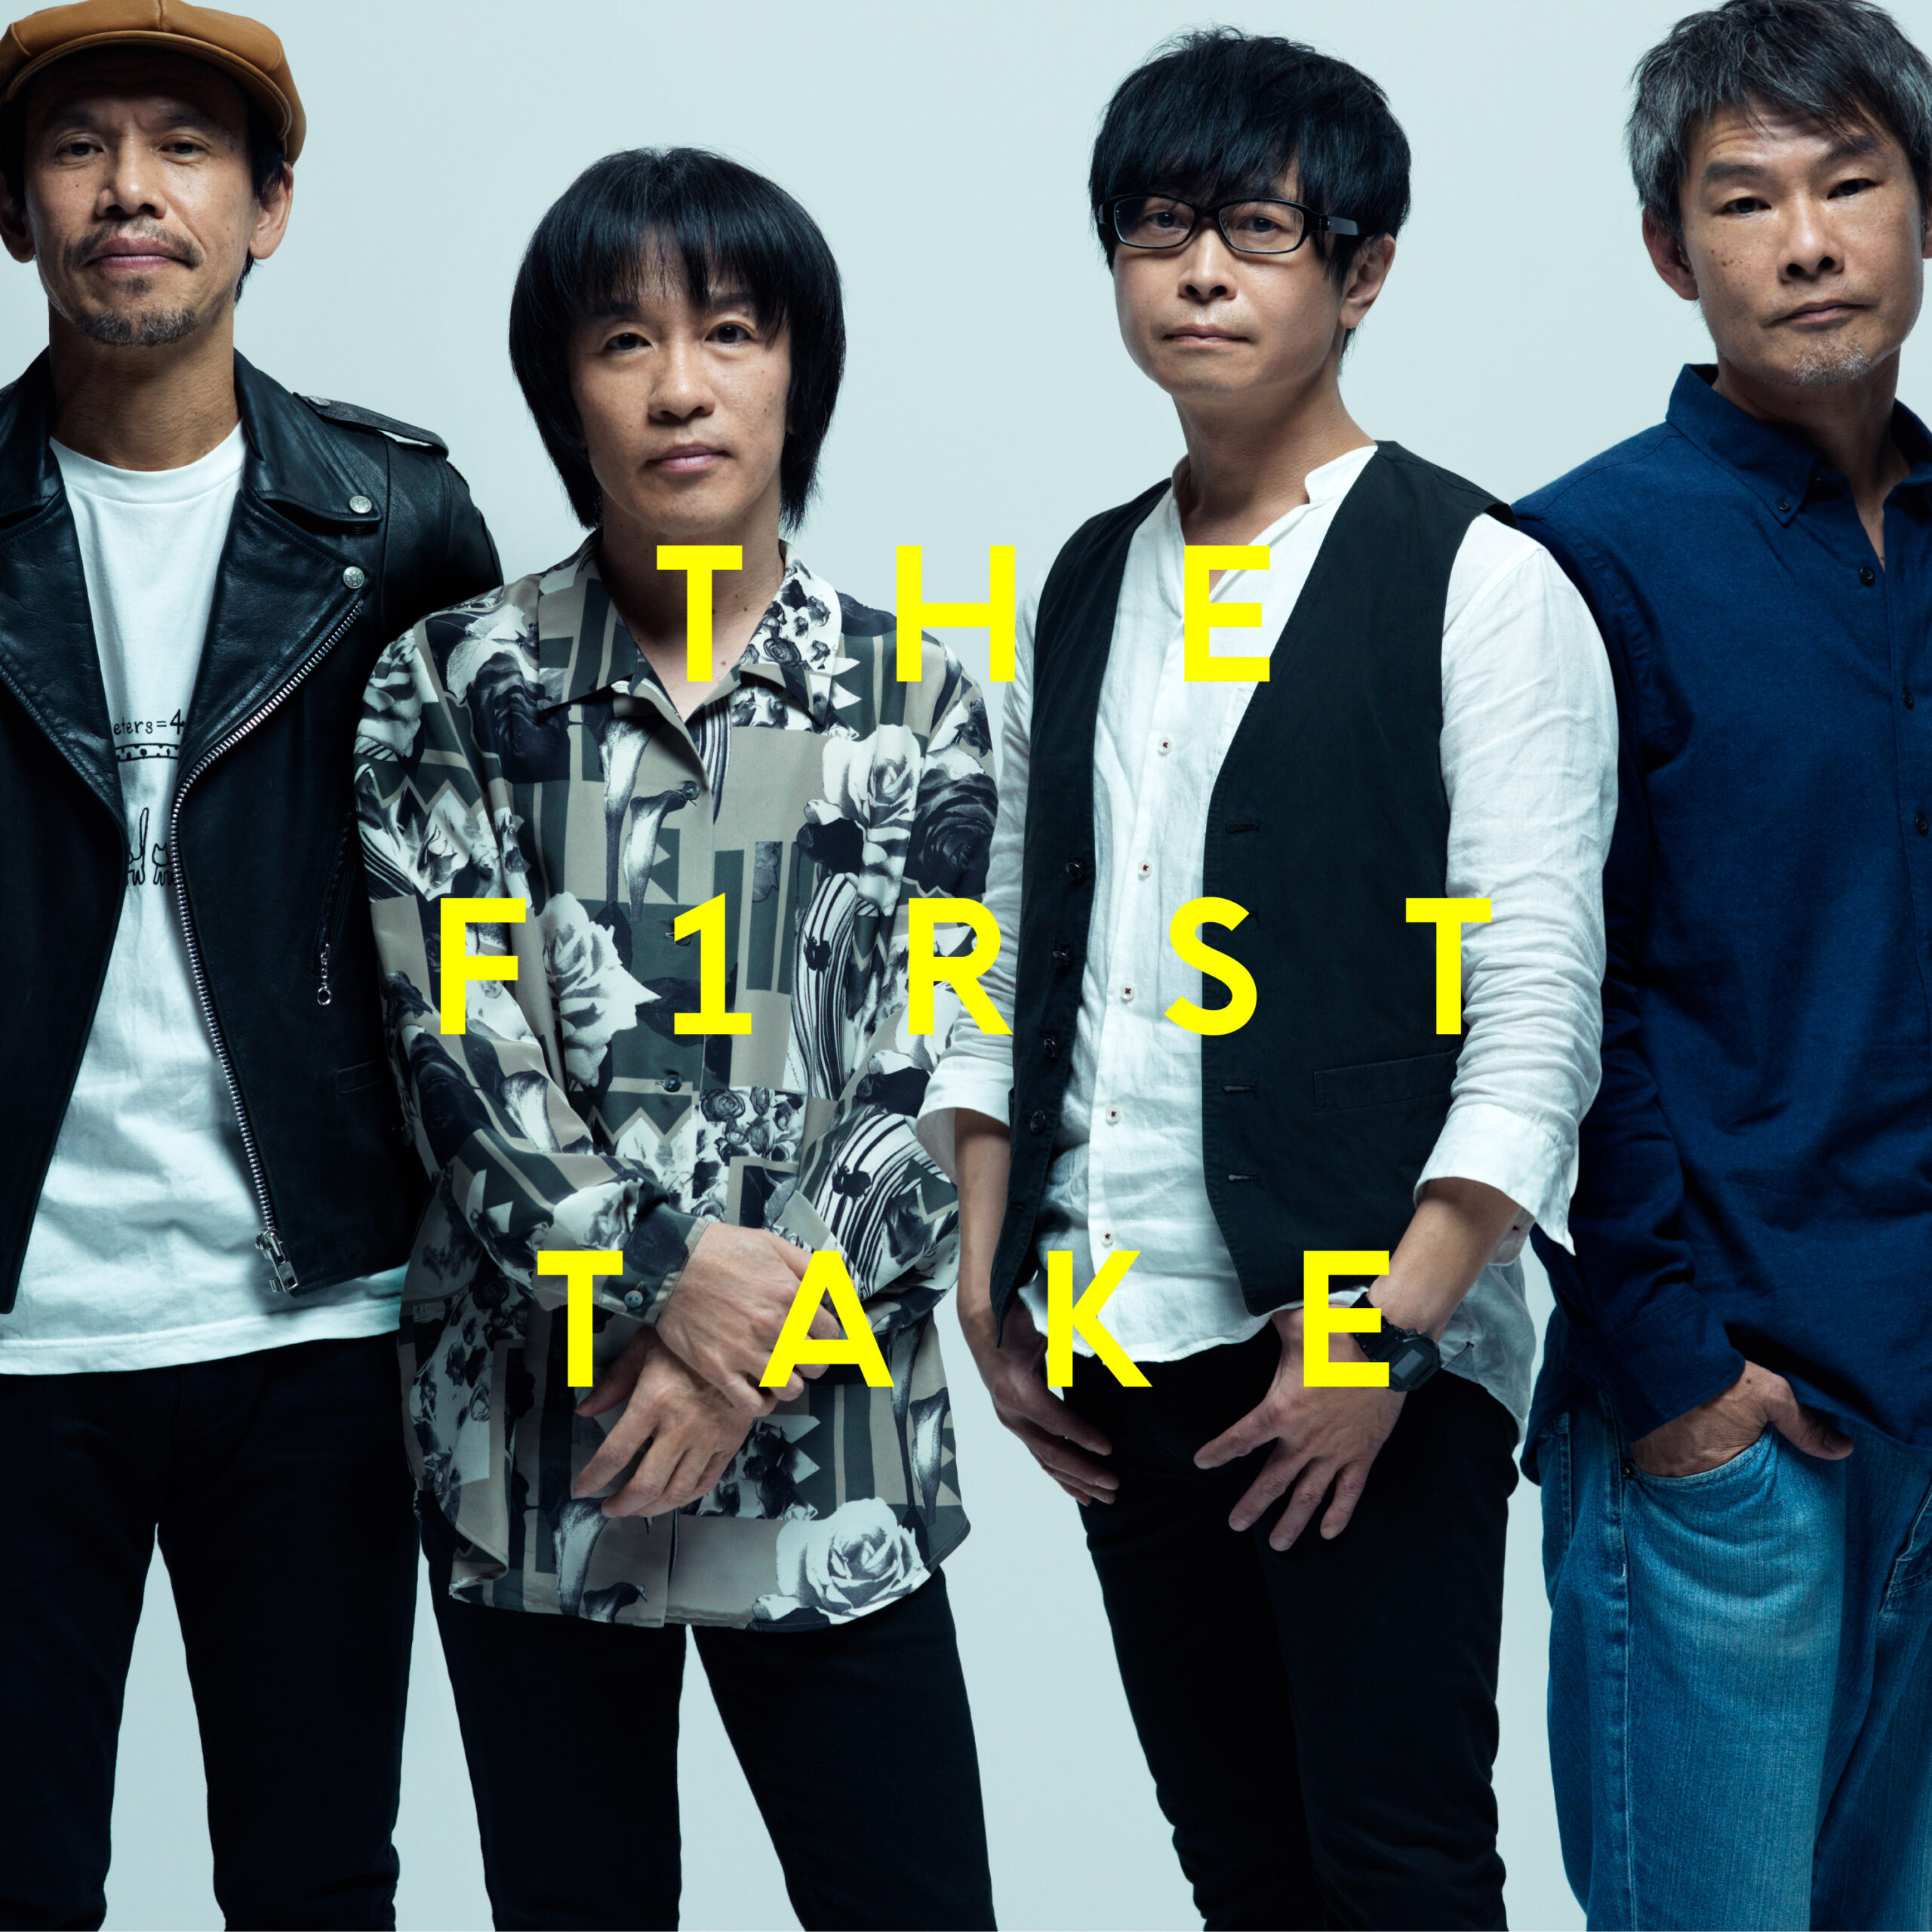 RELEASE情報】「深夜高速 – From THE FIRST TAKE」「東京タワー – From THE FIRST  TAKE」音源配信スタート！ フラワーカンパニーズ OFFICIAL WEBSITE